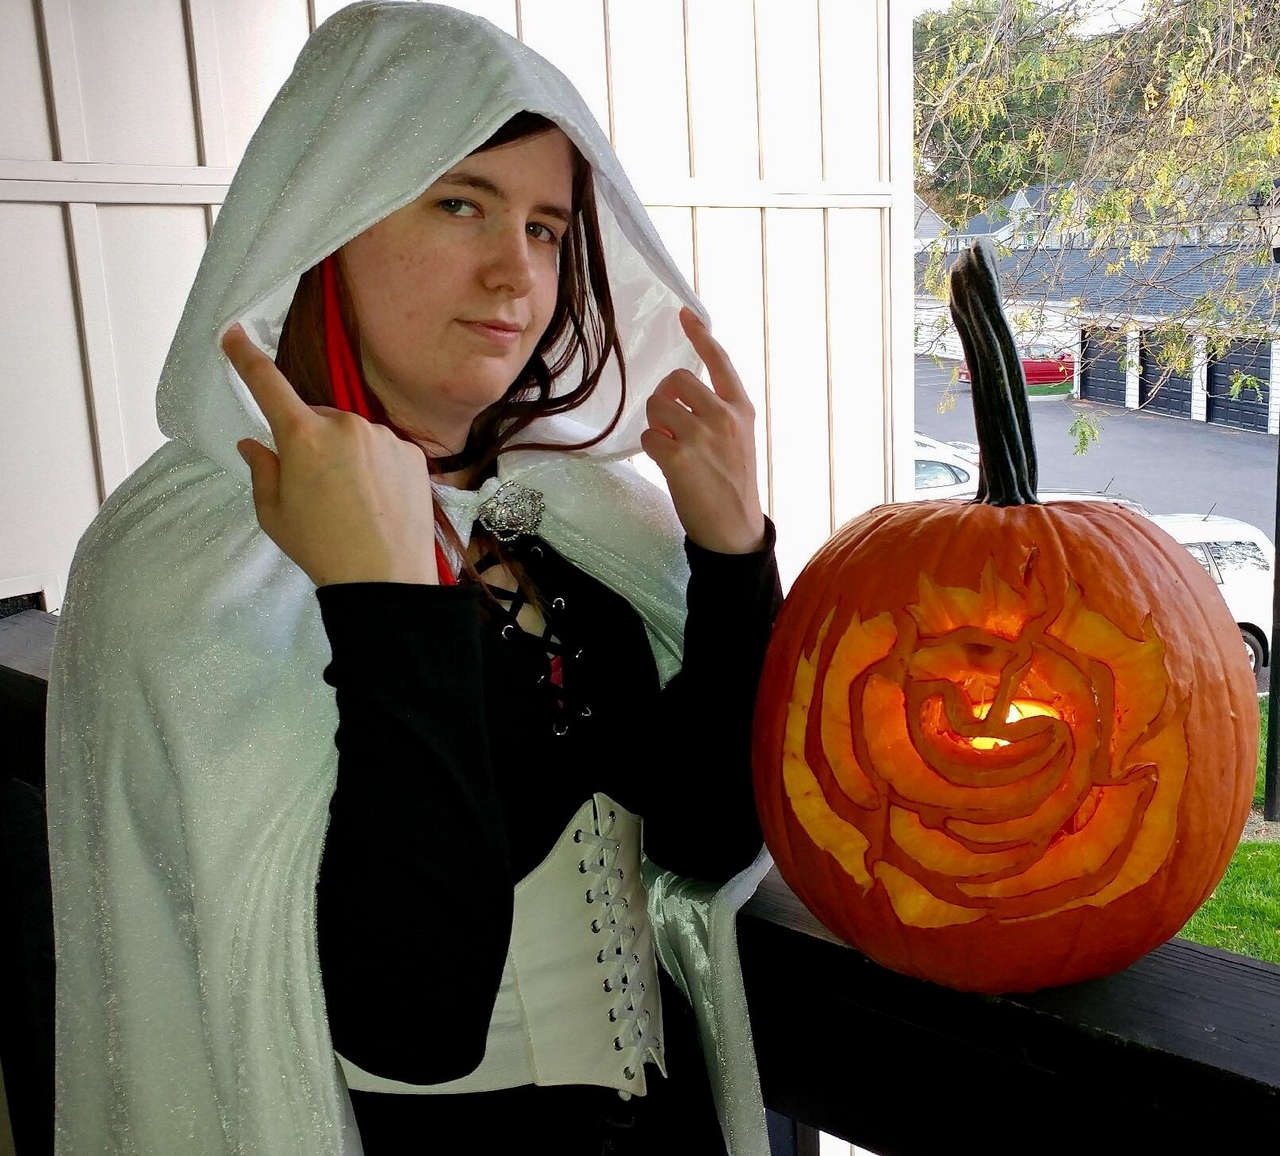 Self My Summer Rose Cosplay With Symbol Carved Pumpkin Ready For Hallowee